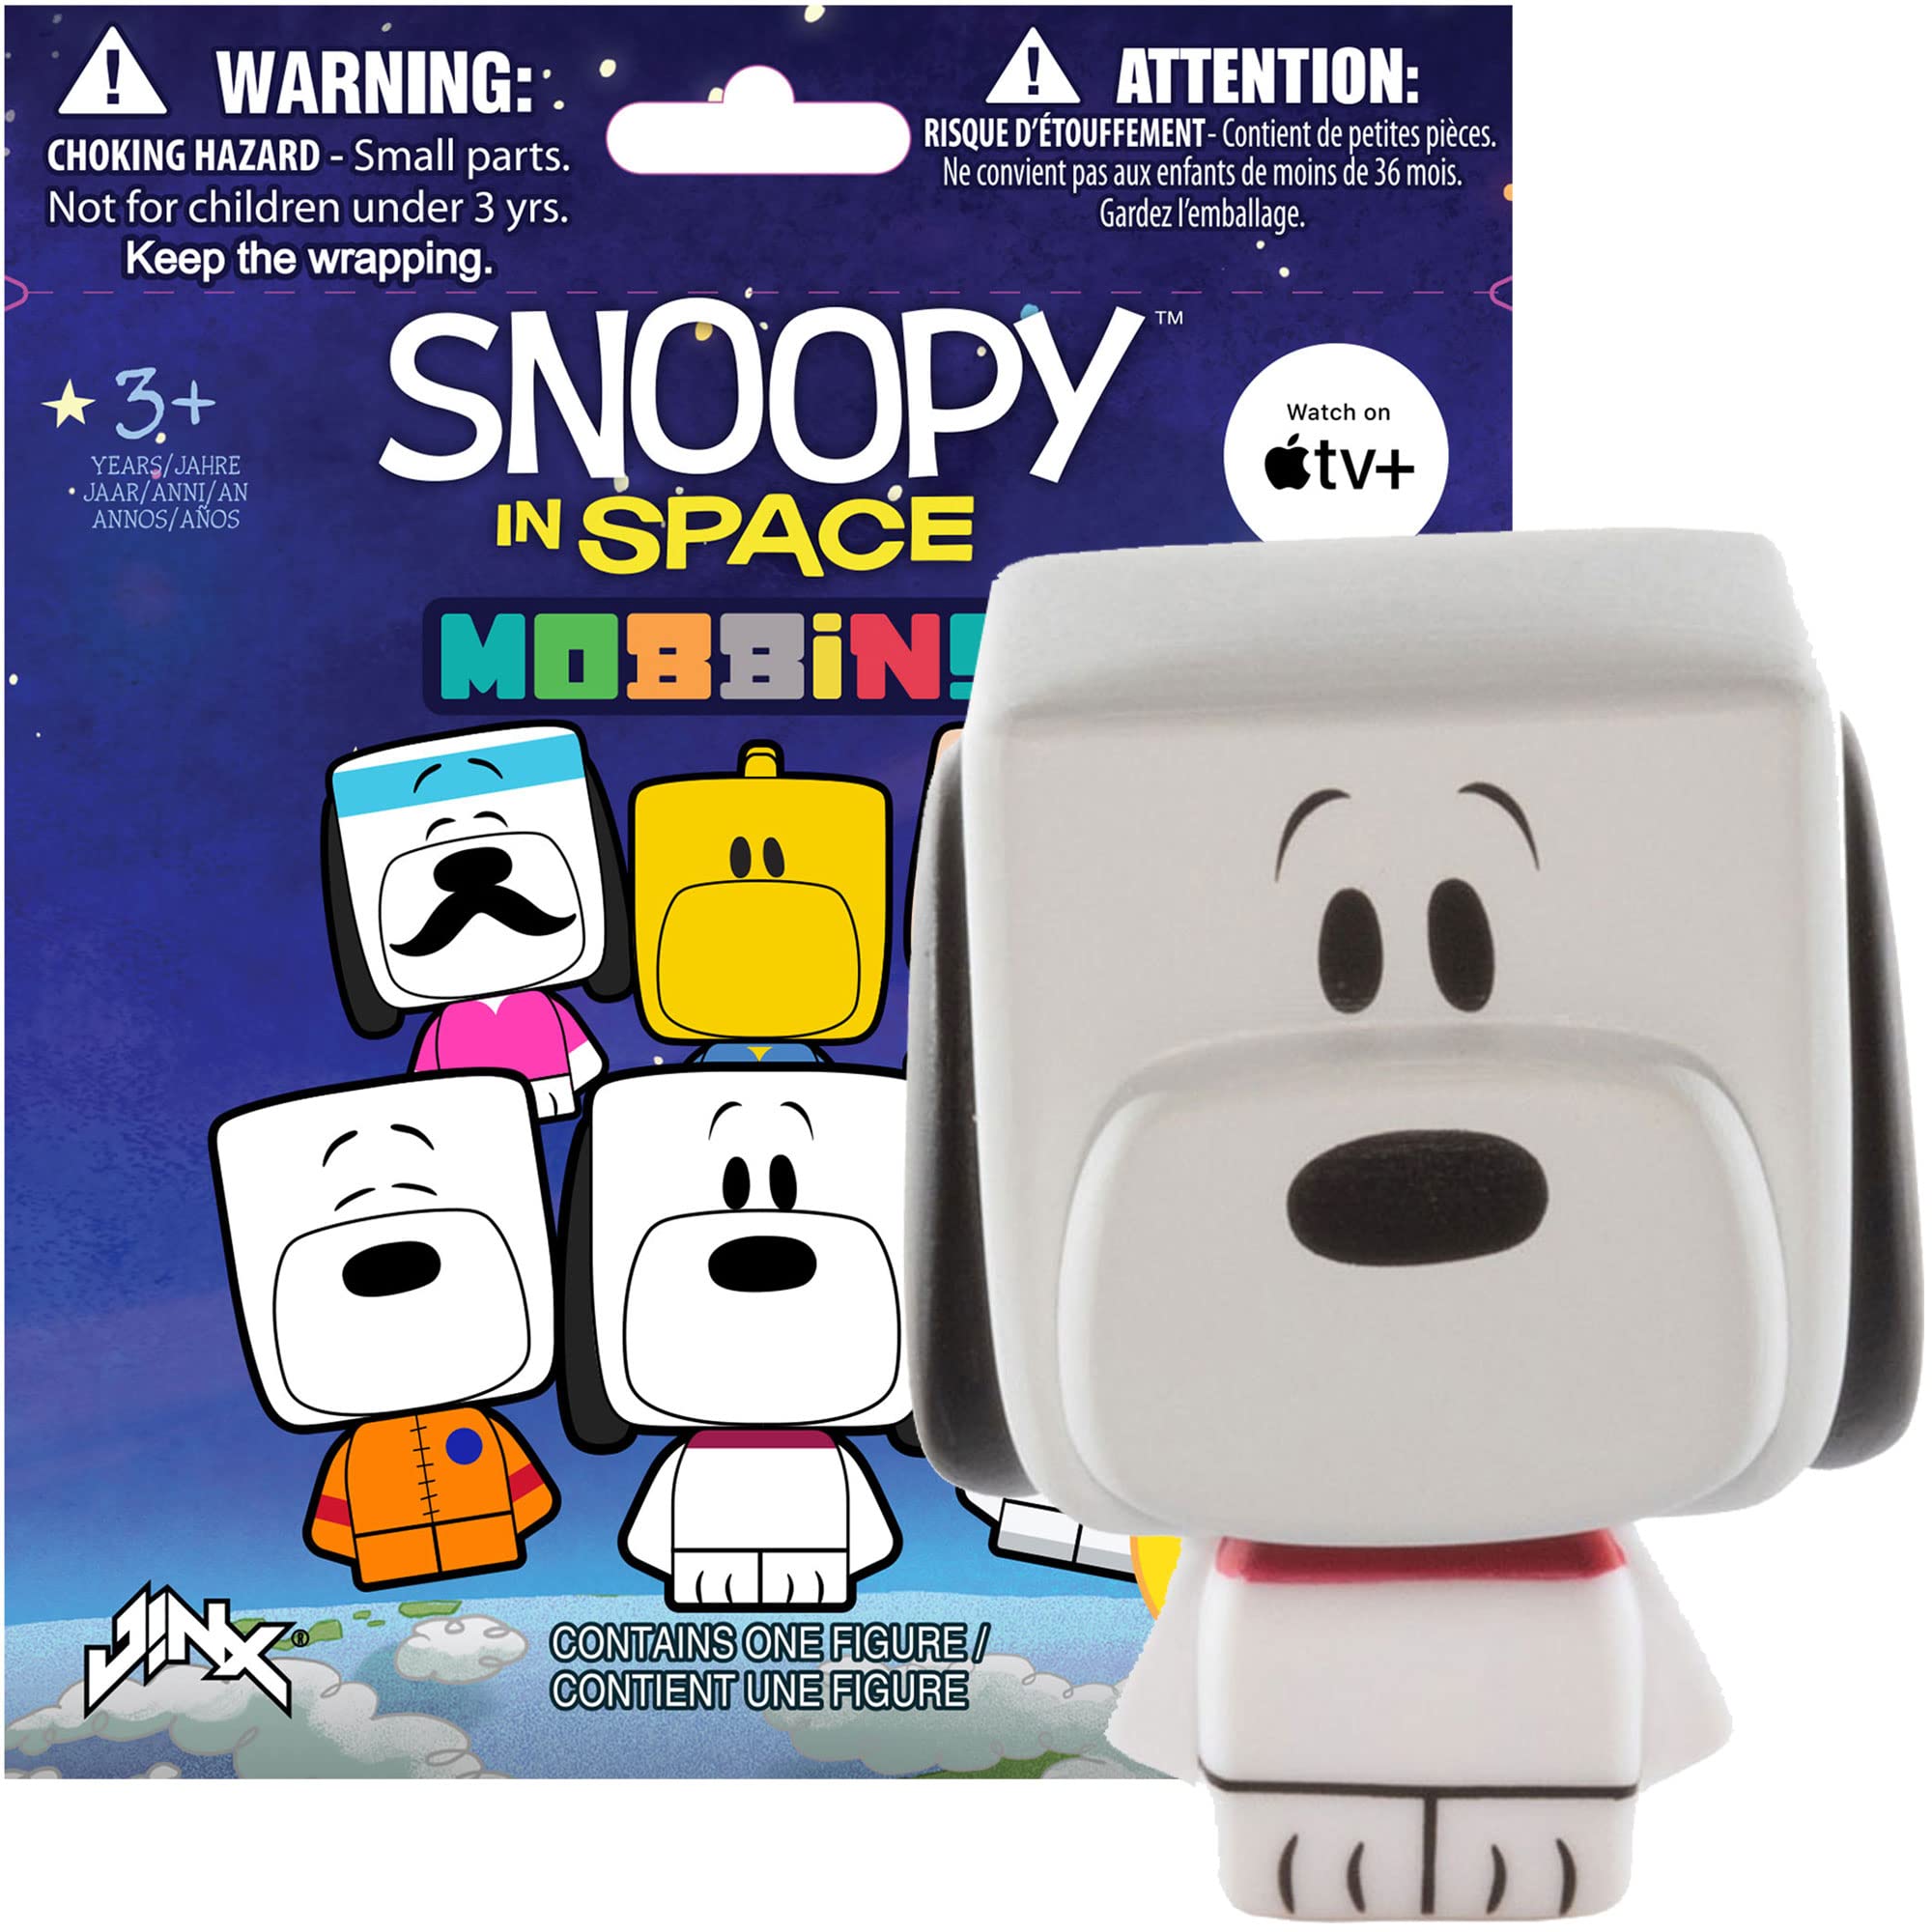 JINX Snoopy in Space Mobbins Toy Blind Pack (One Mystery Figure), 2-in Vinyl Figure from Apple TV+ Series for Fans Ages 3+